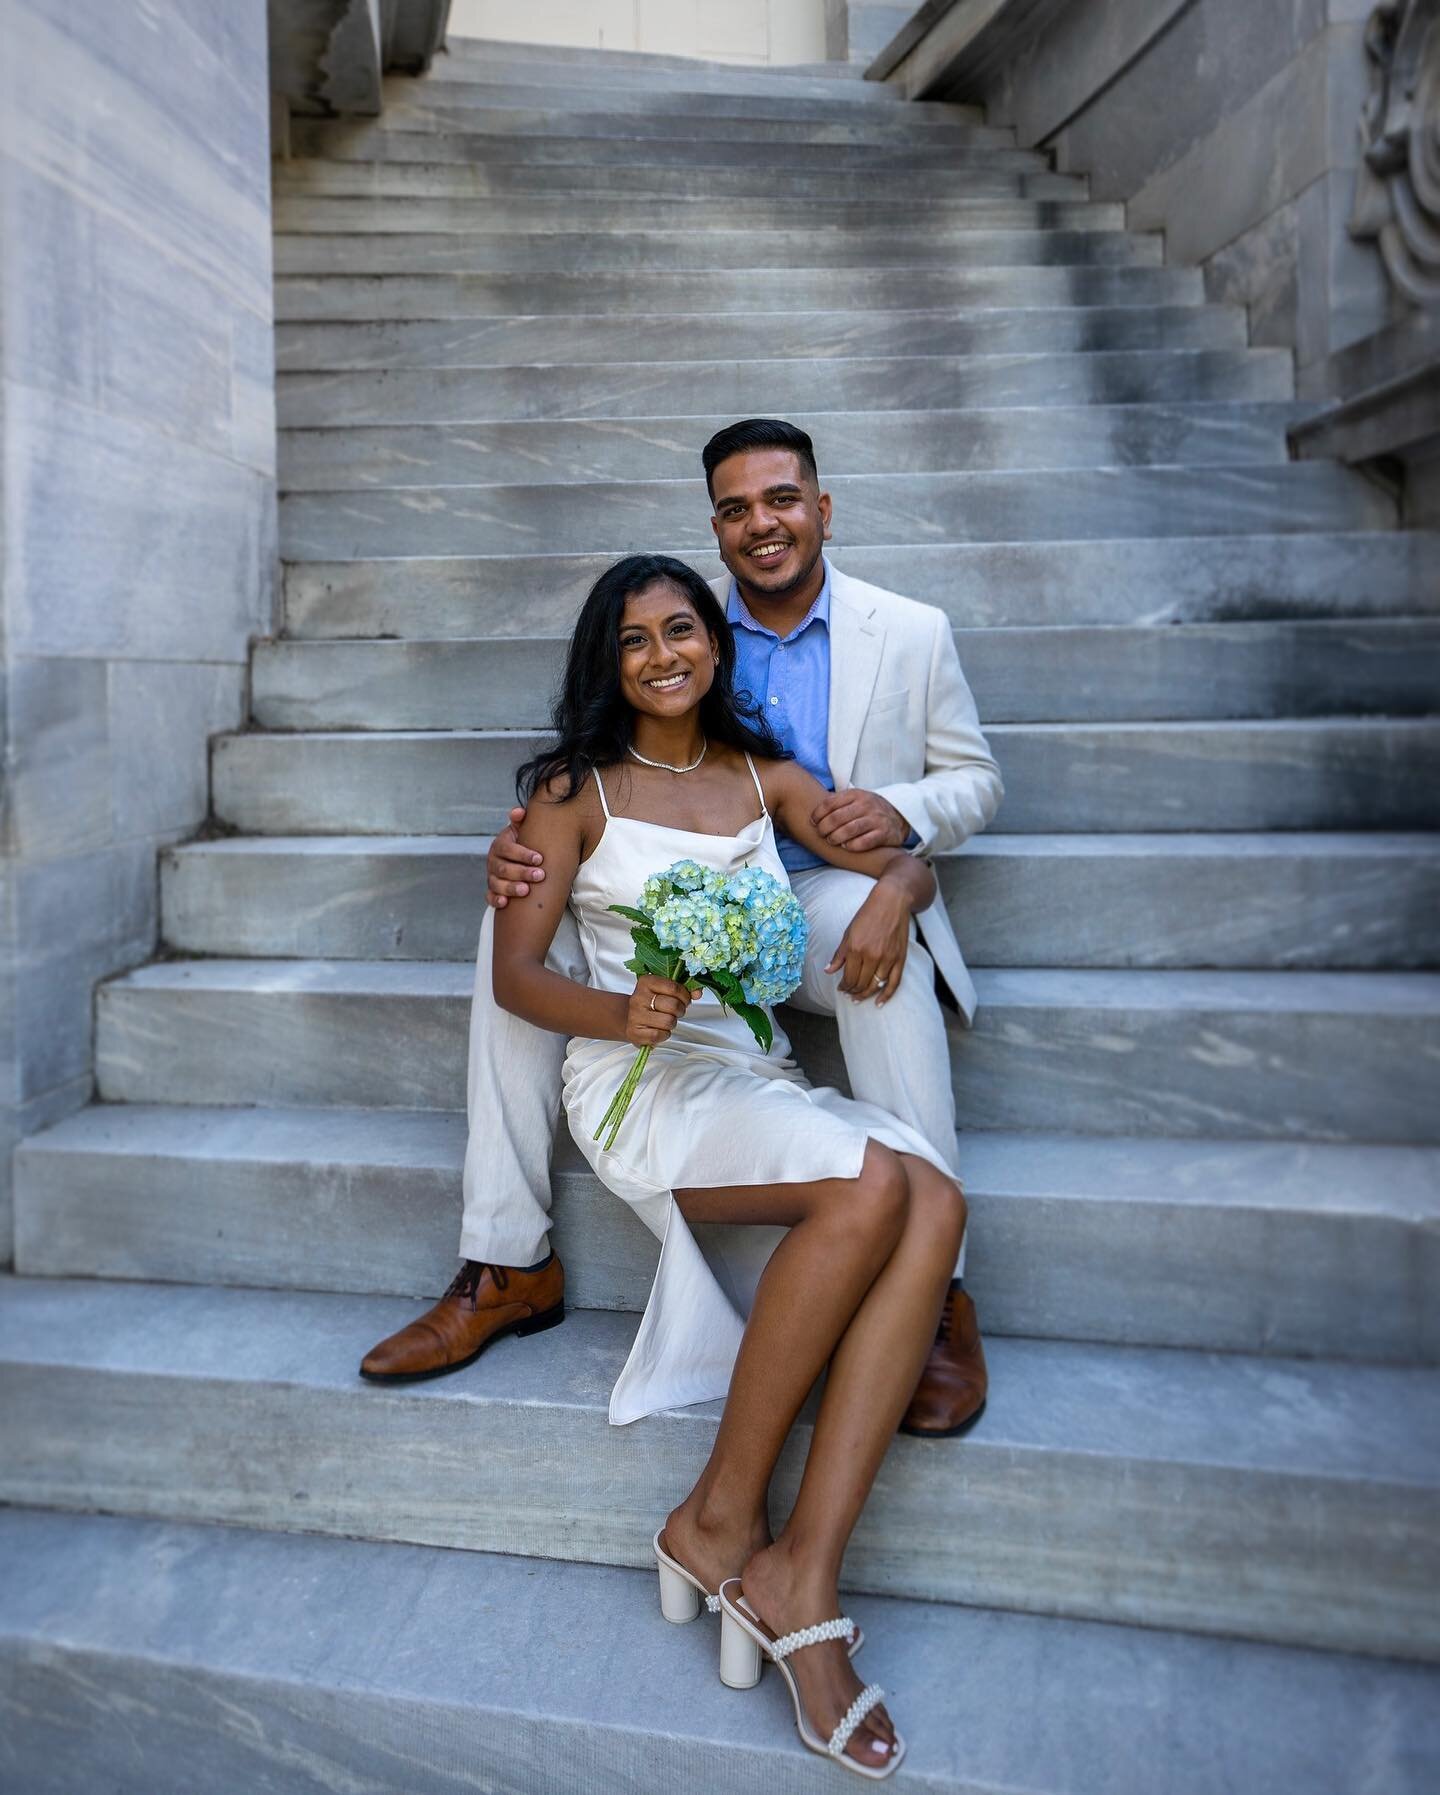 Wedding season is upon us ✨💍
.
.
.
Obsessed with how well Saj and Marla rock the white on white in these photos ⚪️🔥
#weddingphotography #instaweddingphotography #whiteonwhite #portraitphotography #billfischphotography #📸️